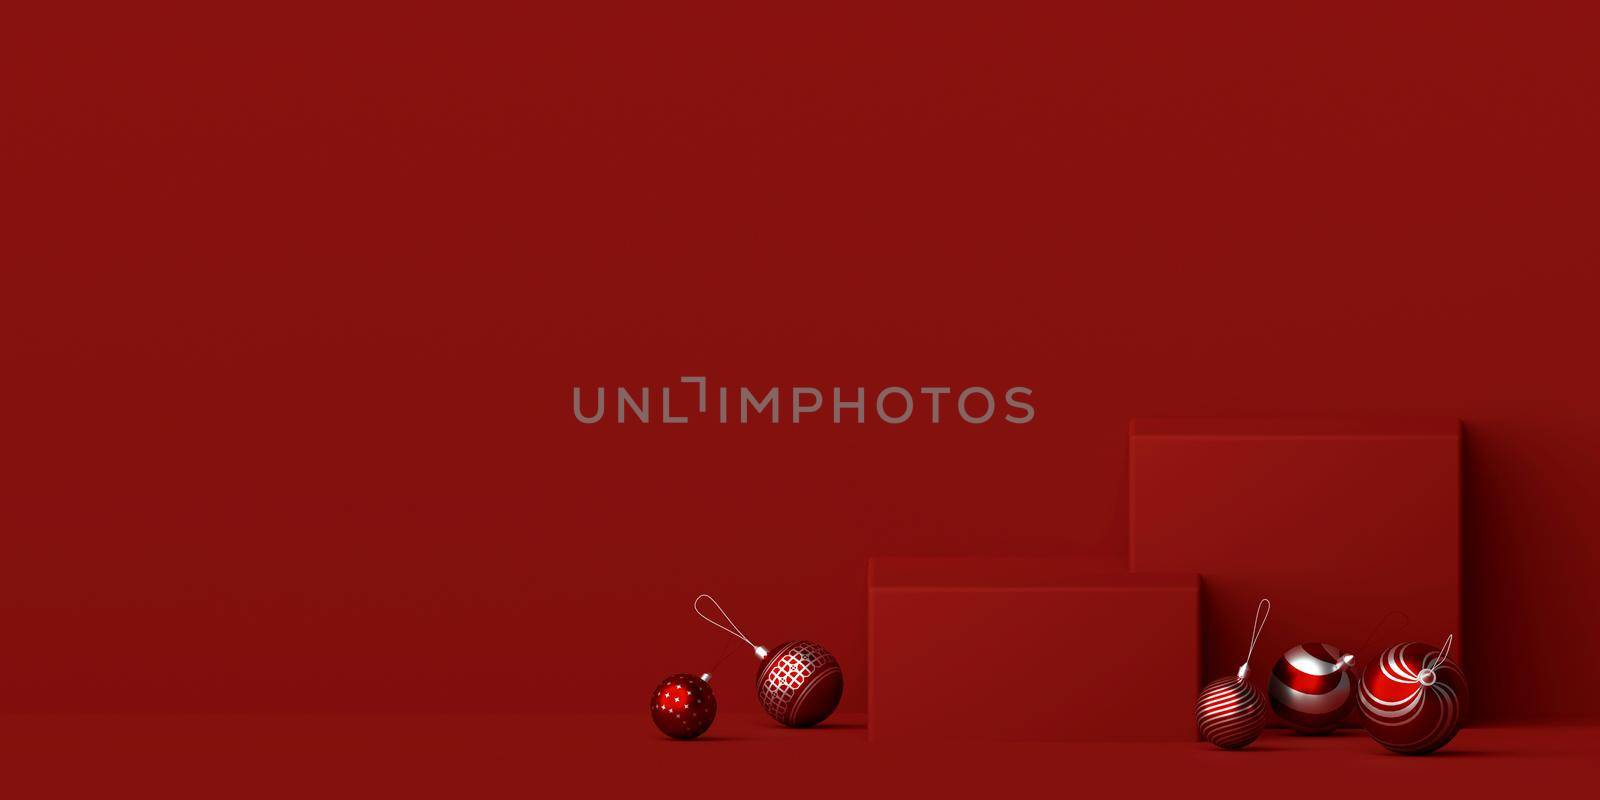 Geometric podium with Christmas ball for product advertisement, 3d illustration by nutzchotwarut